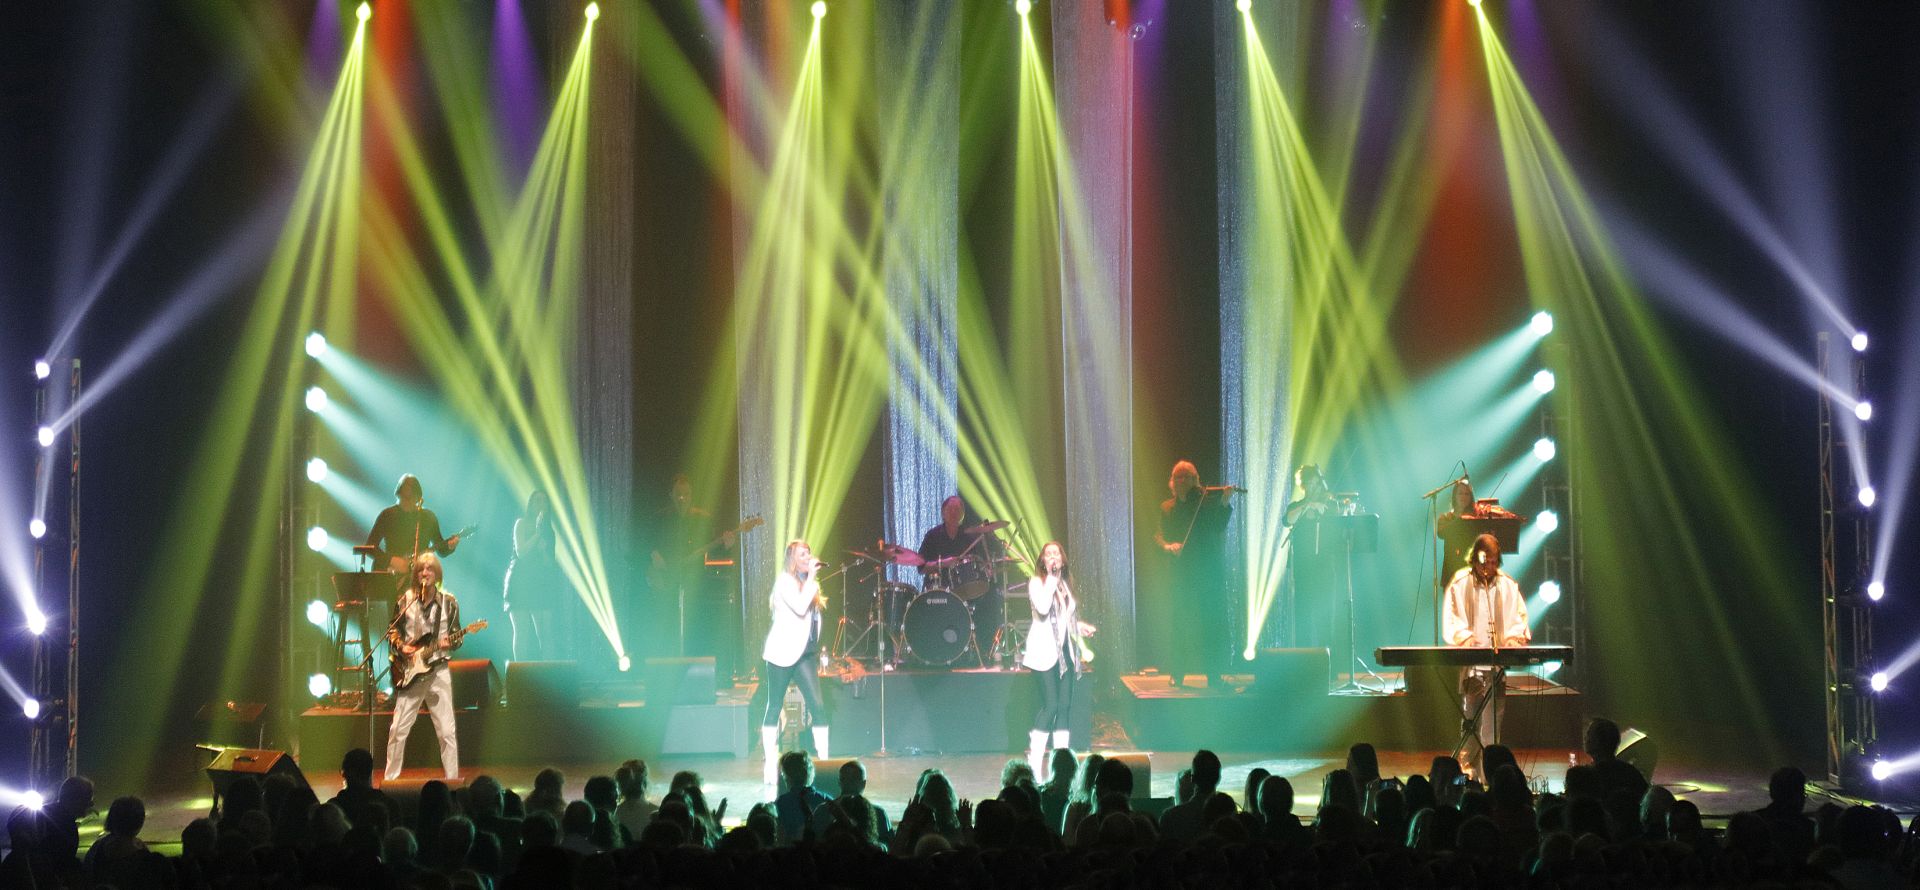 ABBA Mania performed live on stage at Sea Island Resort